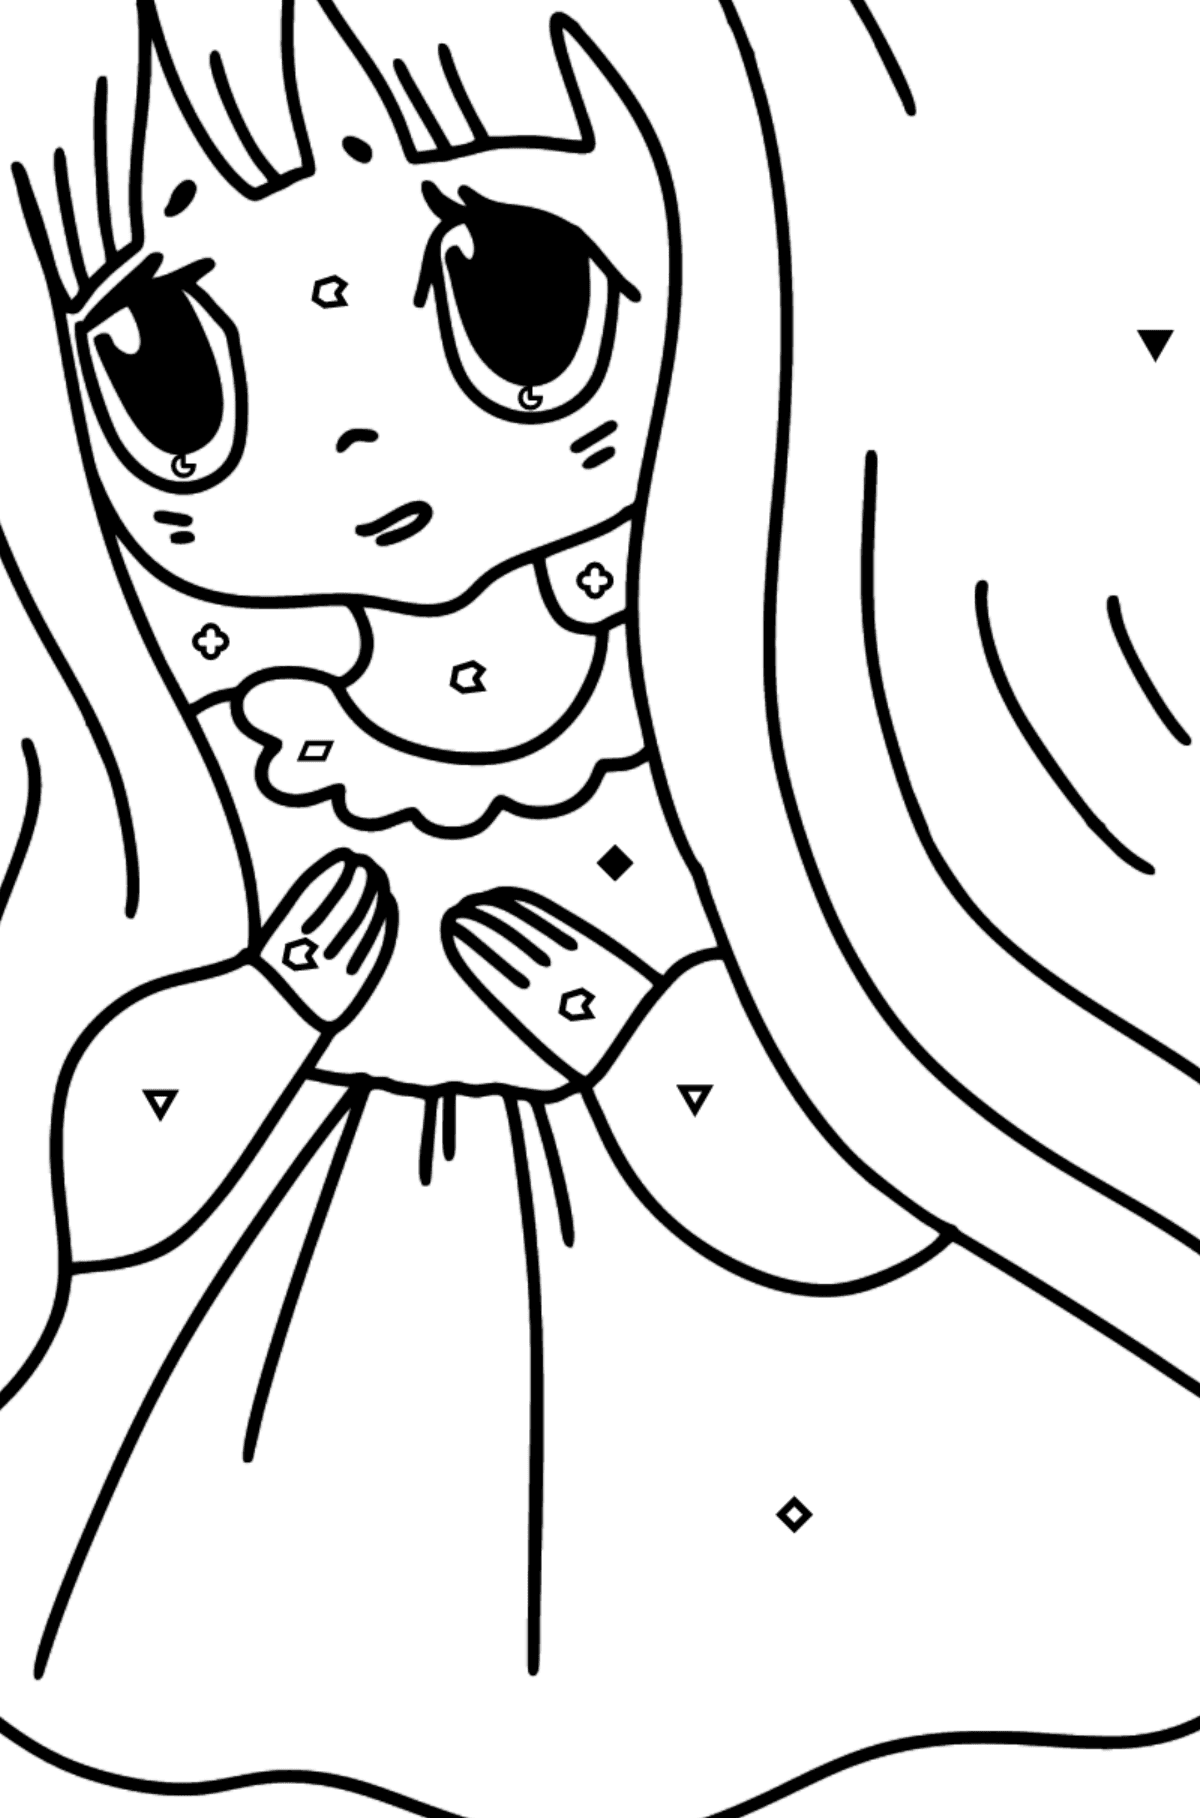 Anime Sad Girl Coloring Pages - Coloring by Symbols and Geometric Shapes for Kids